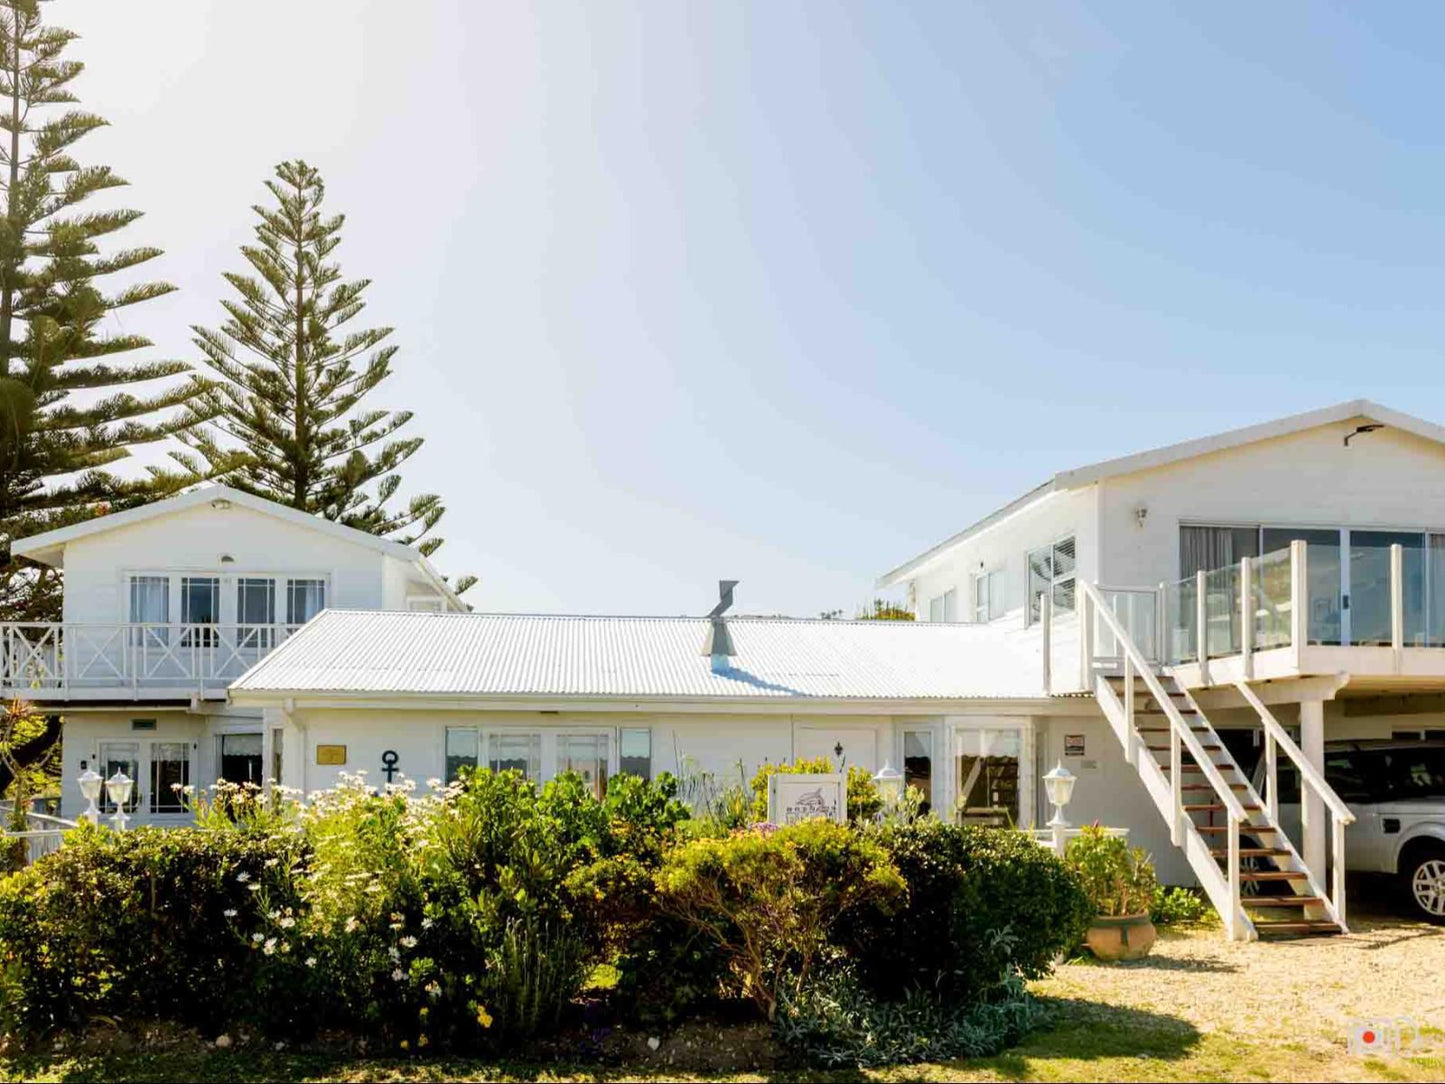 Brenton Beach House Brenton On Sea Knysna Western Cape South Africa Complementary Colors, Building, Architecture, House